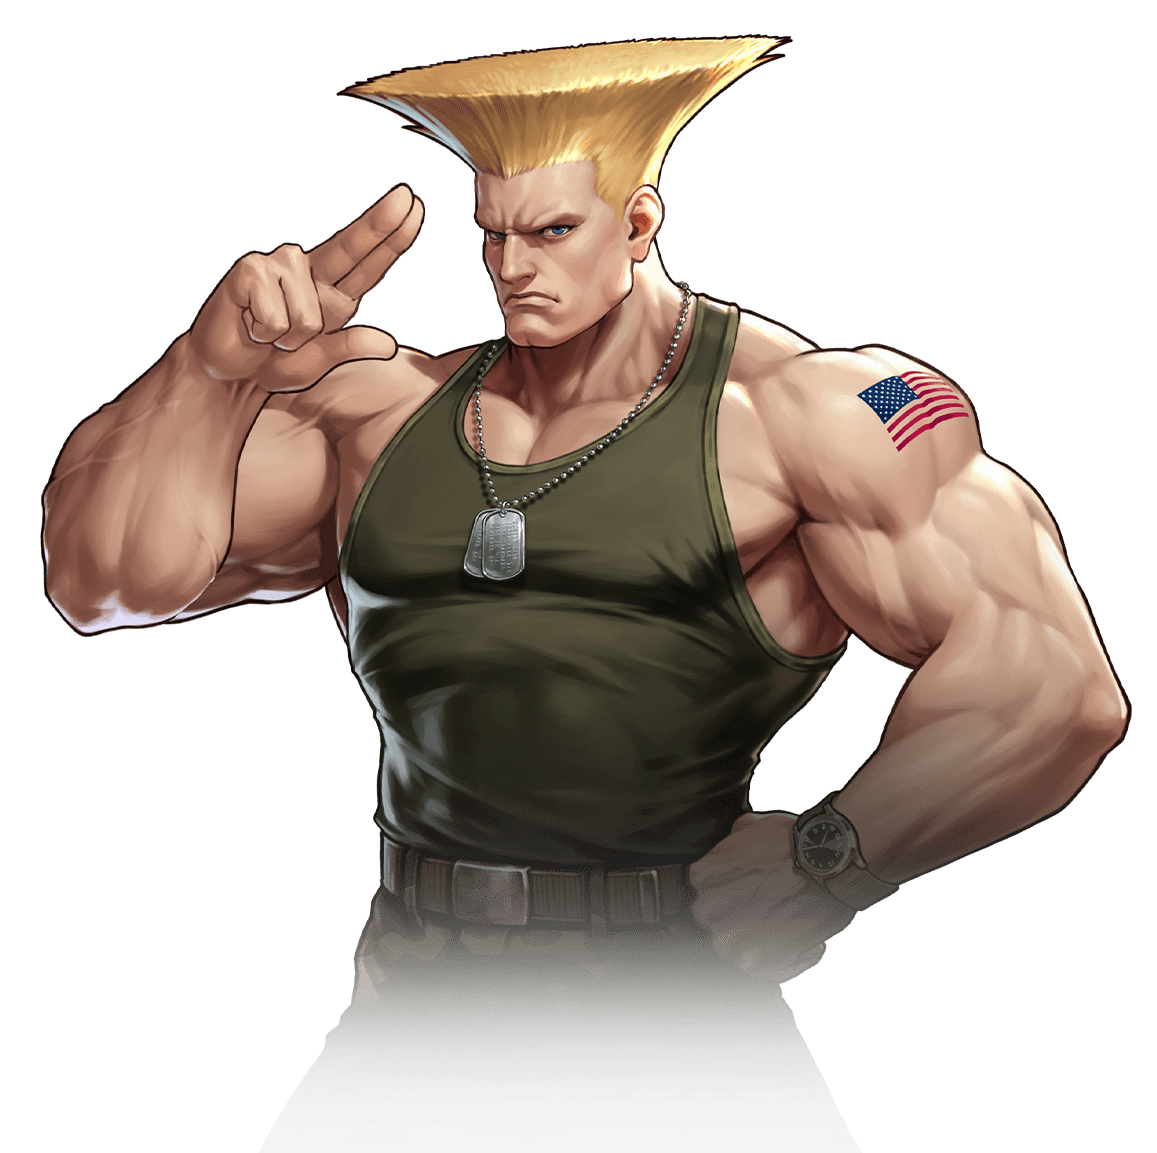 Guile [Street Fighter] - v1.0, Stable Diffusion LoRA